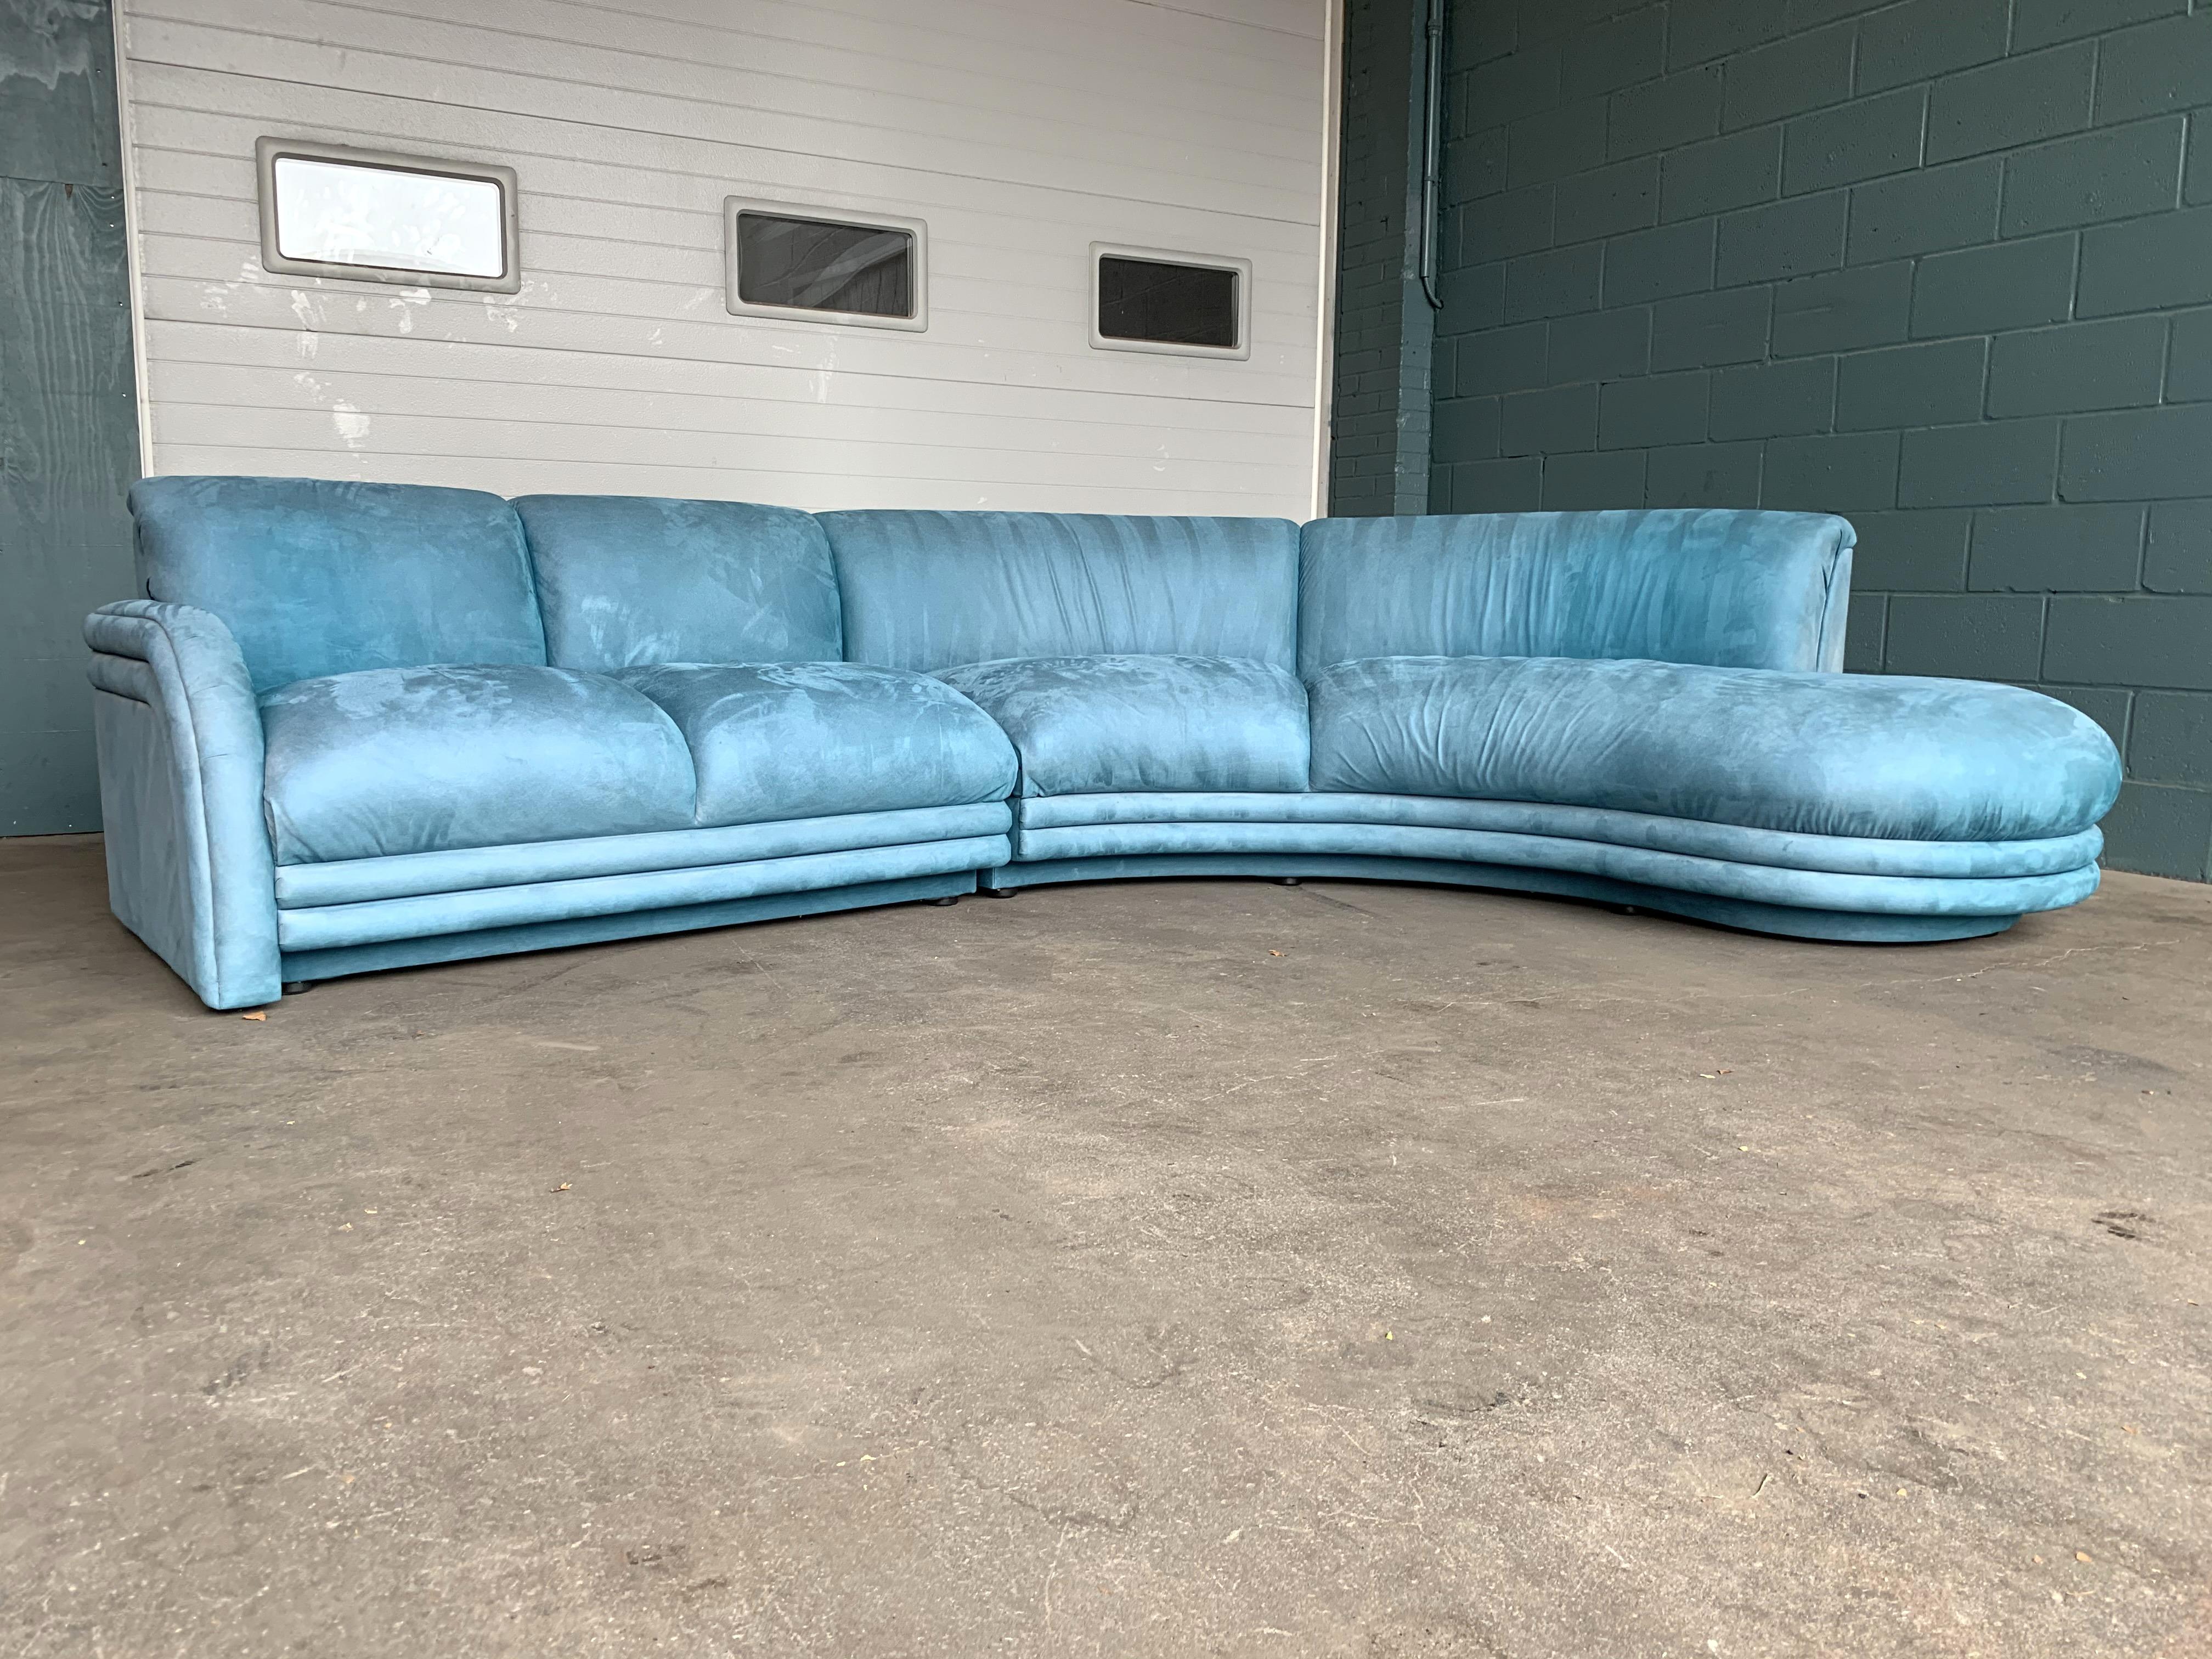 Beautiful two piece sectional in wonderful condition. The color is amazing!
Purchased in the early 1990s.
This tags have been removed.
Also please note that there is one wear spot that I've highlighted. Can definitely be used as-is but would be a